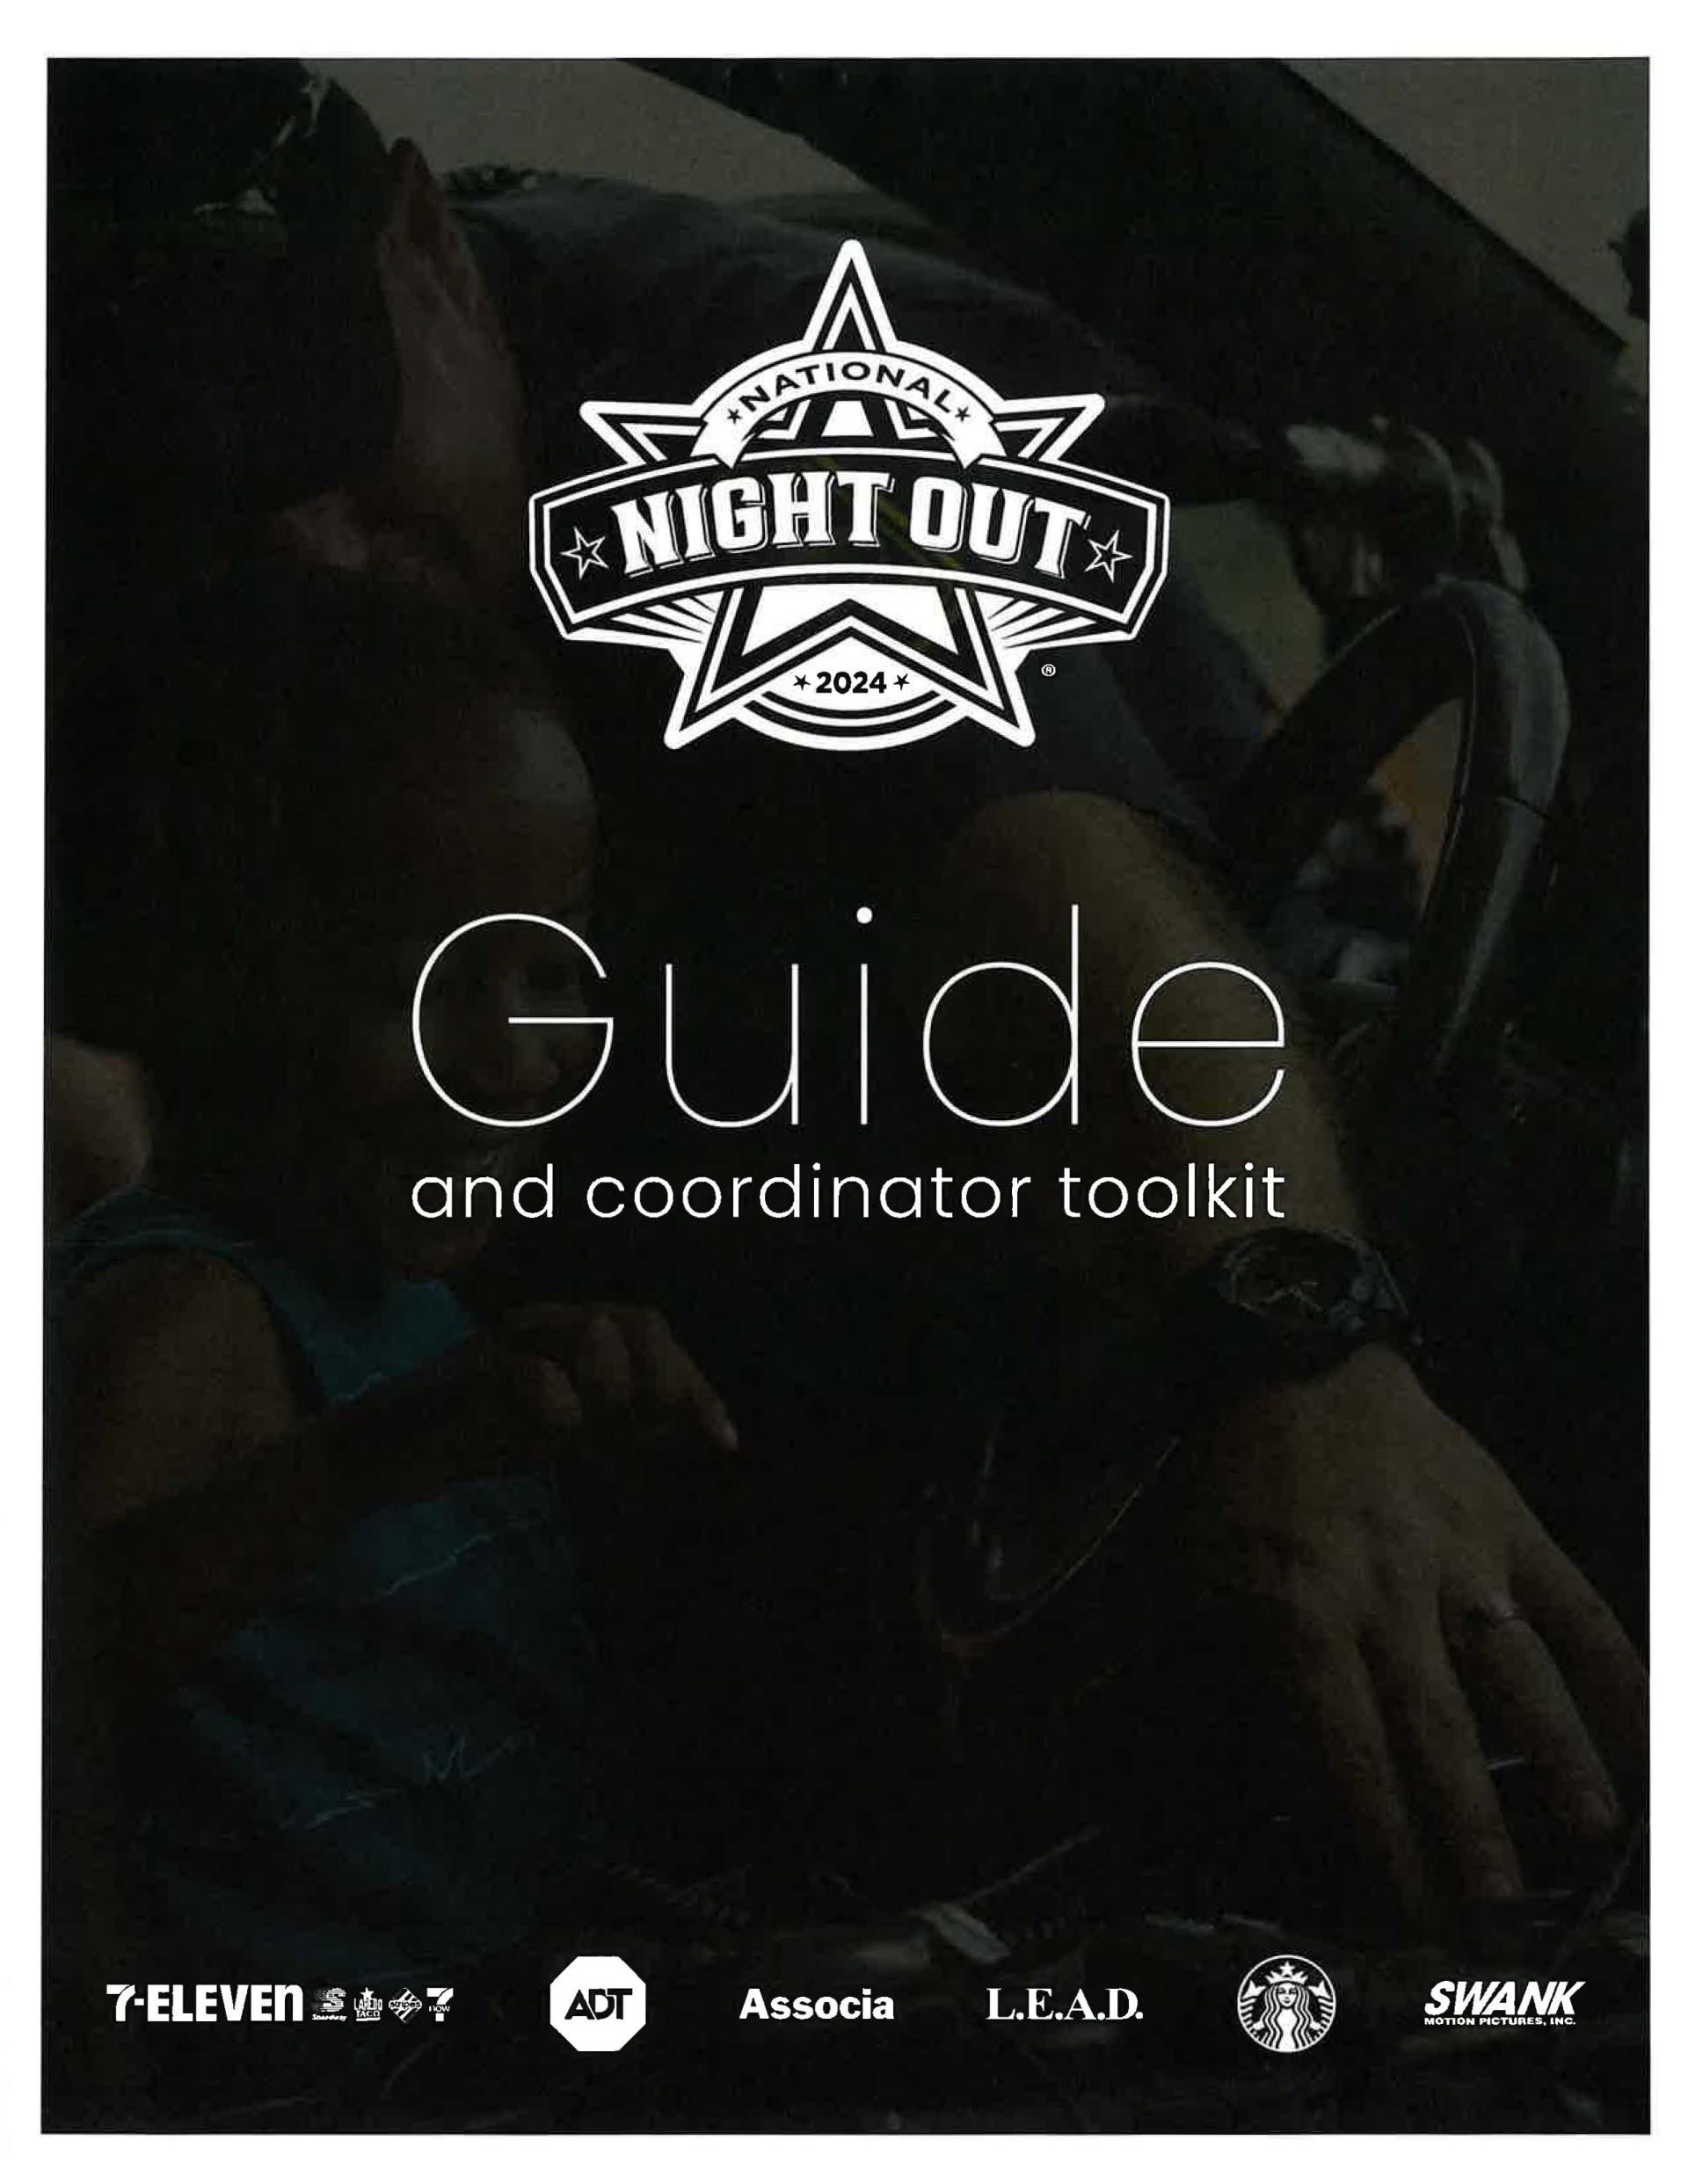 National Night Out 2024 Guide